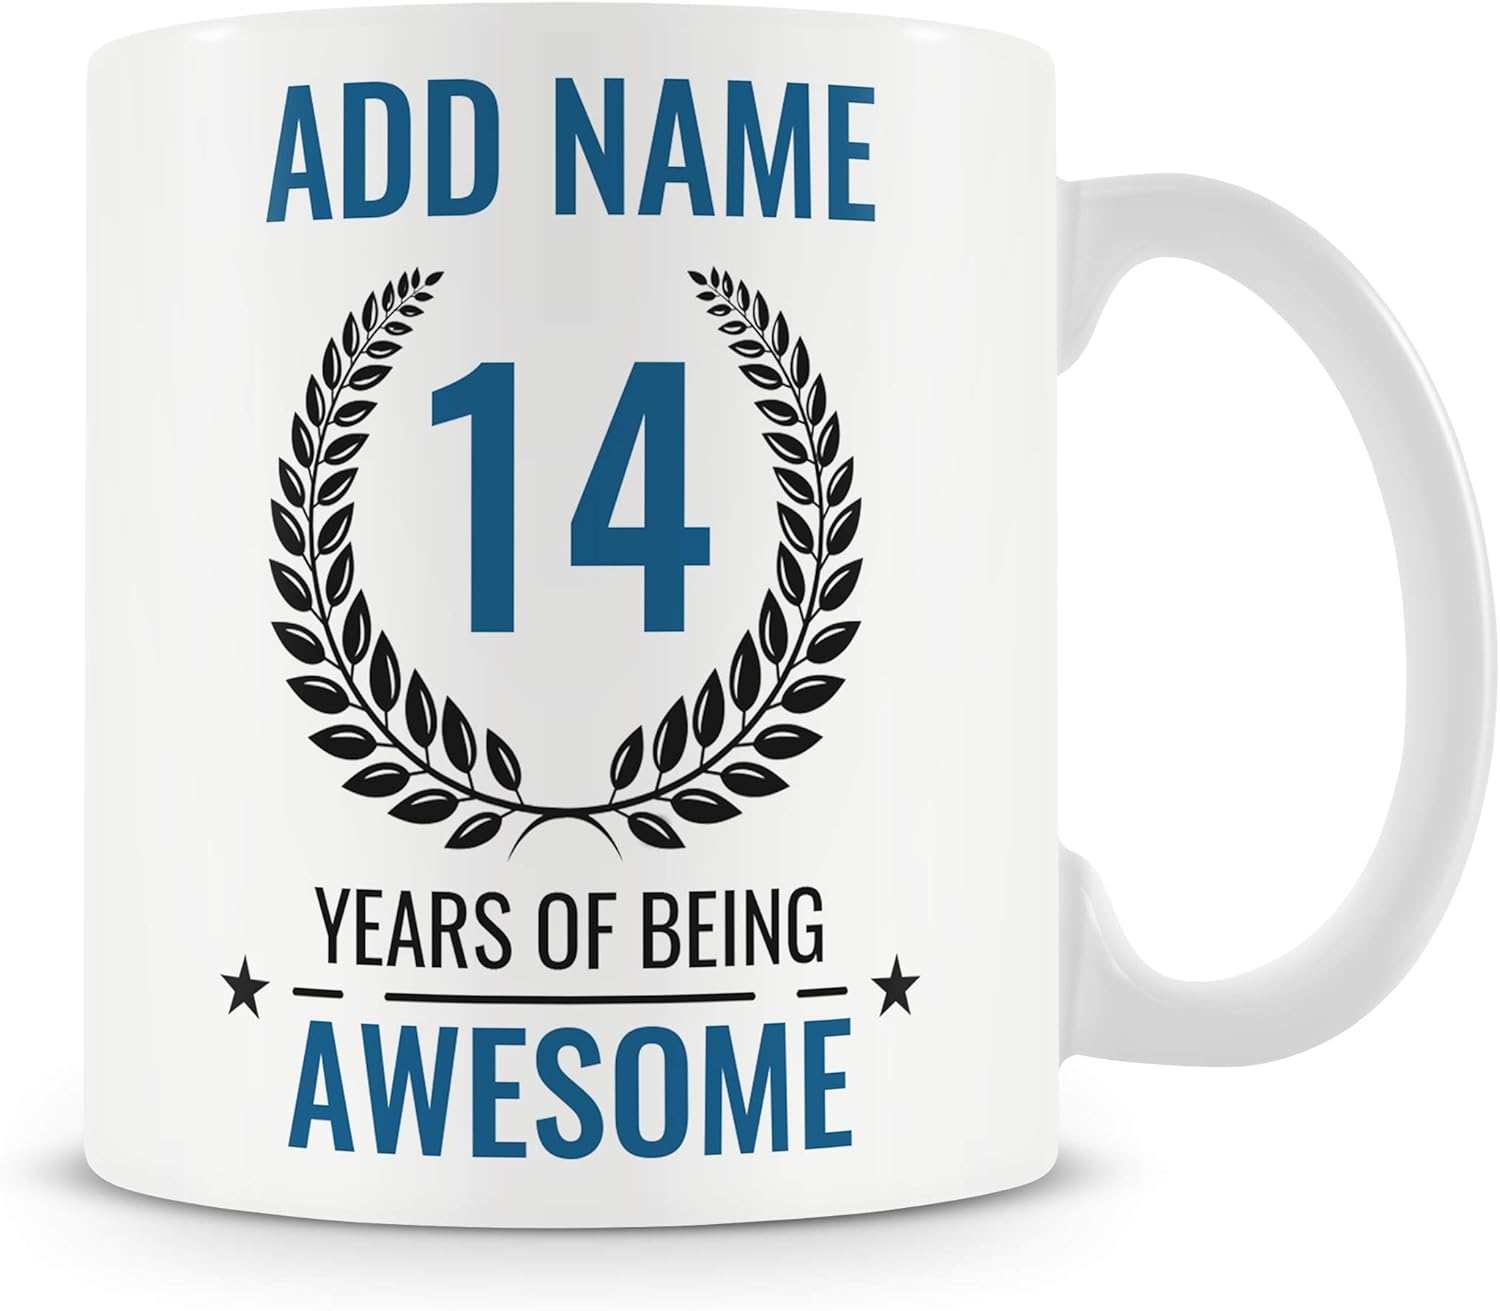 14th Birthday Gift for Boys - Personalised Mug/Cup - Add Name - 14 Years of Being Awesome